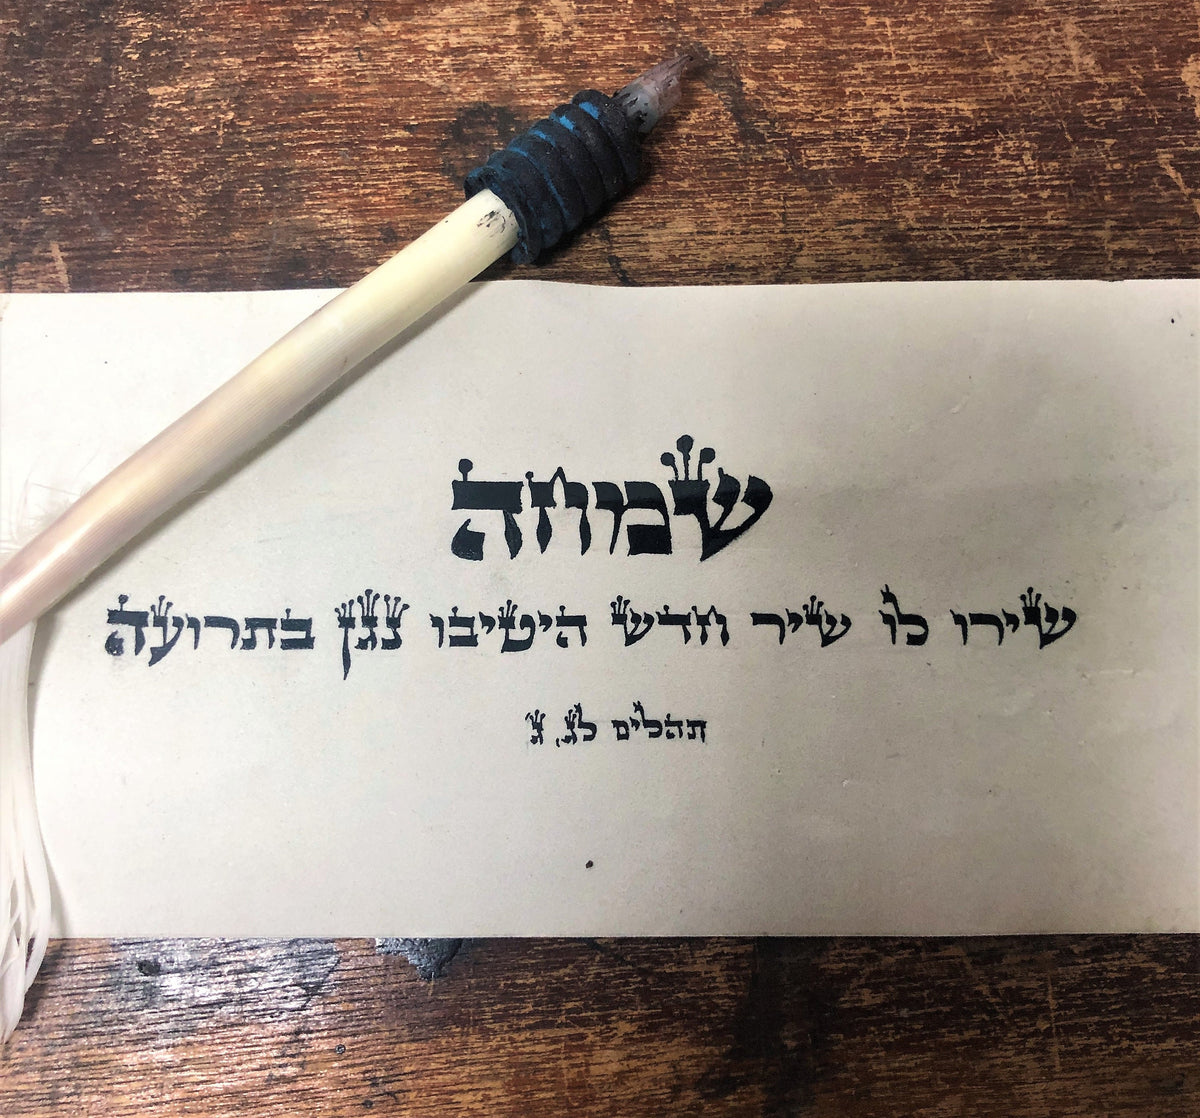 Your Name and Biblical Verse Handwritten in HEBREW on Parchment Personalized Judaica Scribal Art